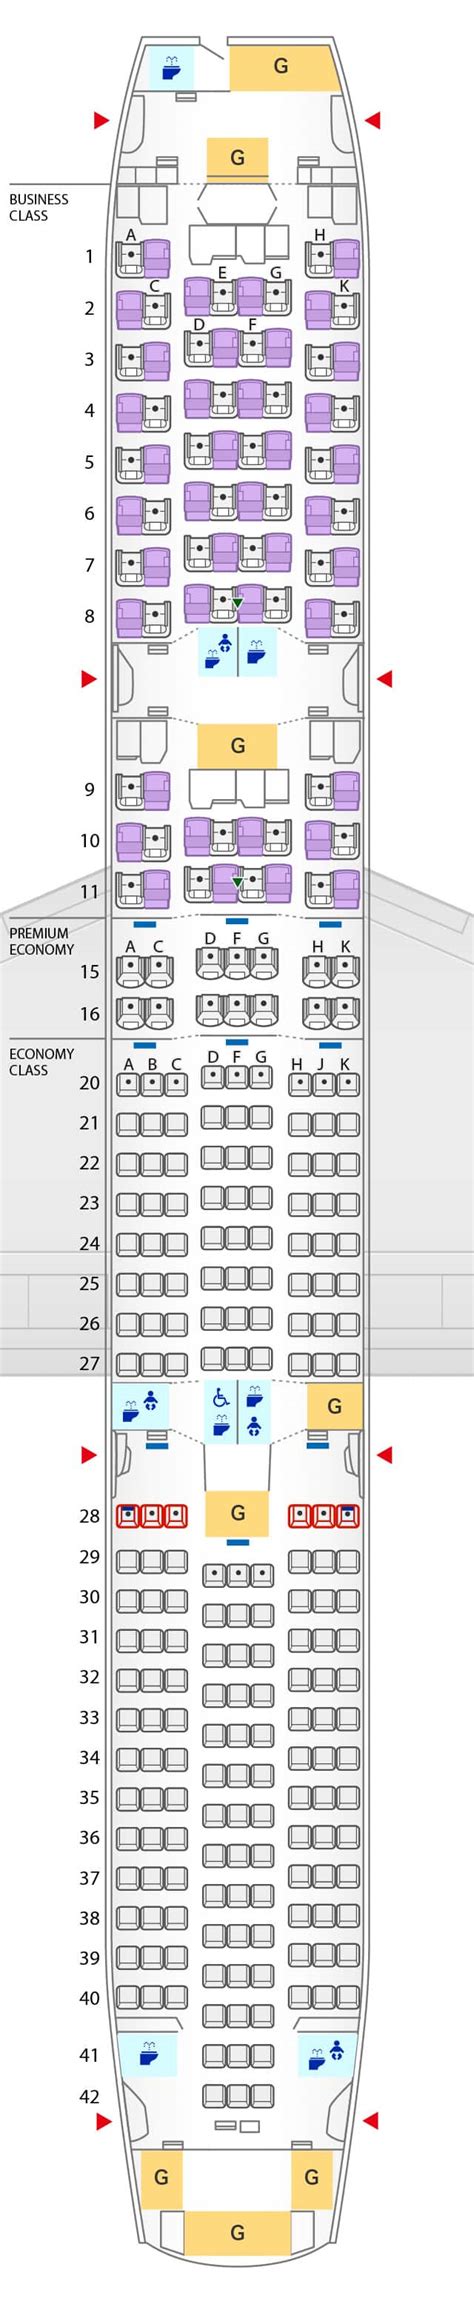 787-9 seat map. The industry-leading technology of the 787 Dreamliner is creating remarkable opportunities for airlines around the world and dramatically improving the air travel experience. We call it the Dreamliner effect. The airplane's unparalleled fuel efficiency and range flexibility enables carriers to profitably open new routes as well as optimize ... 